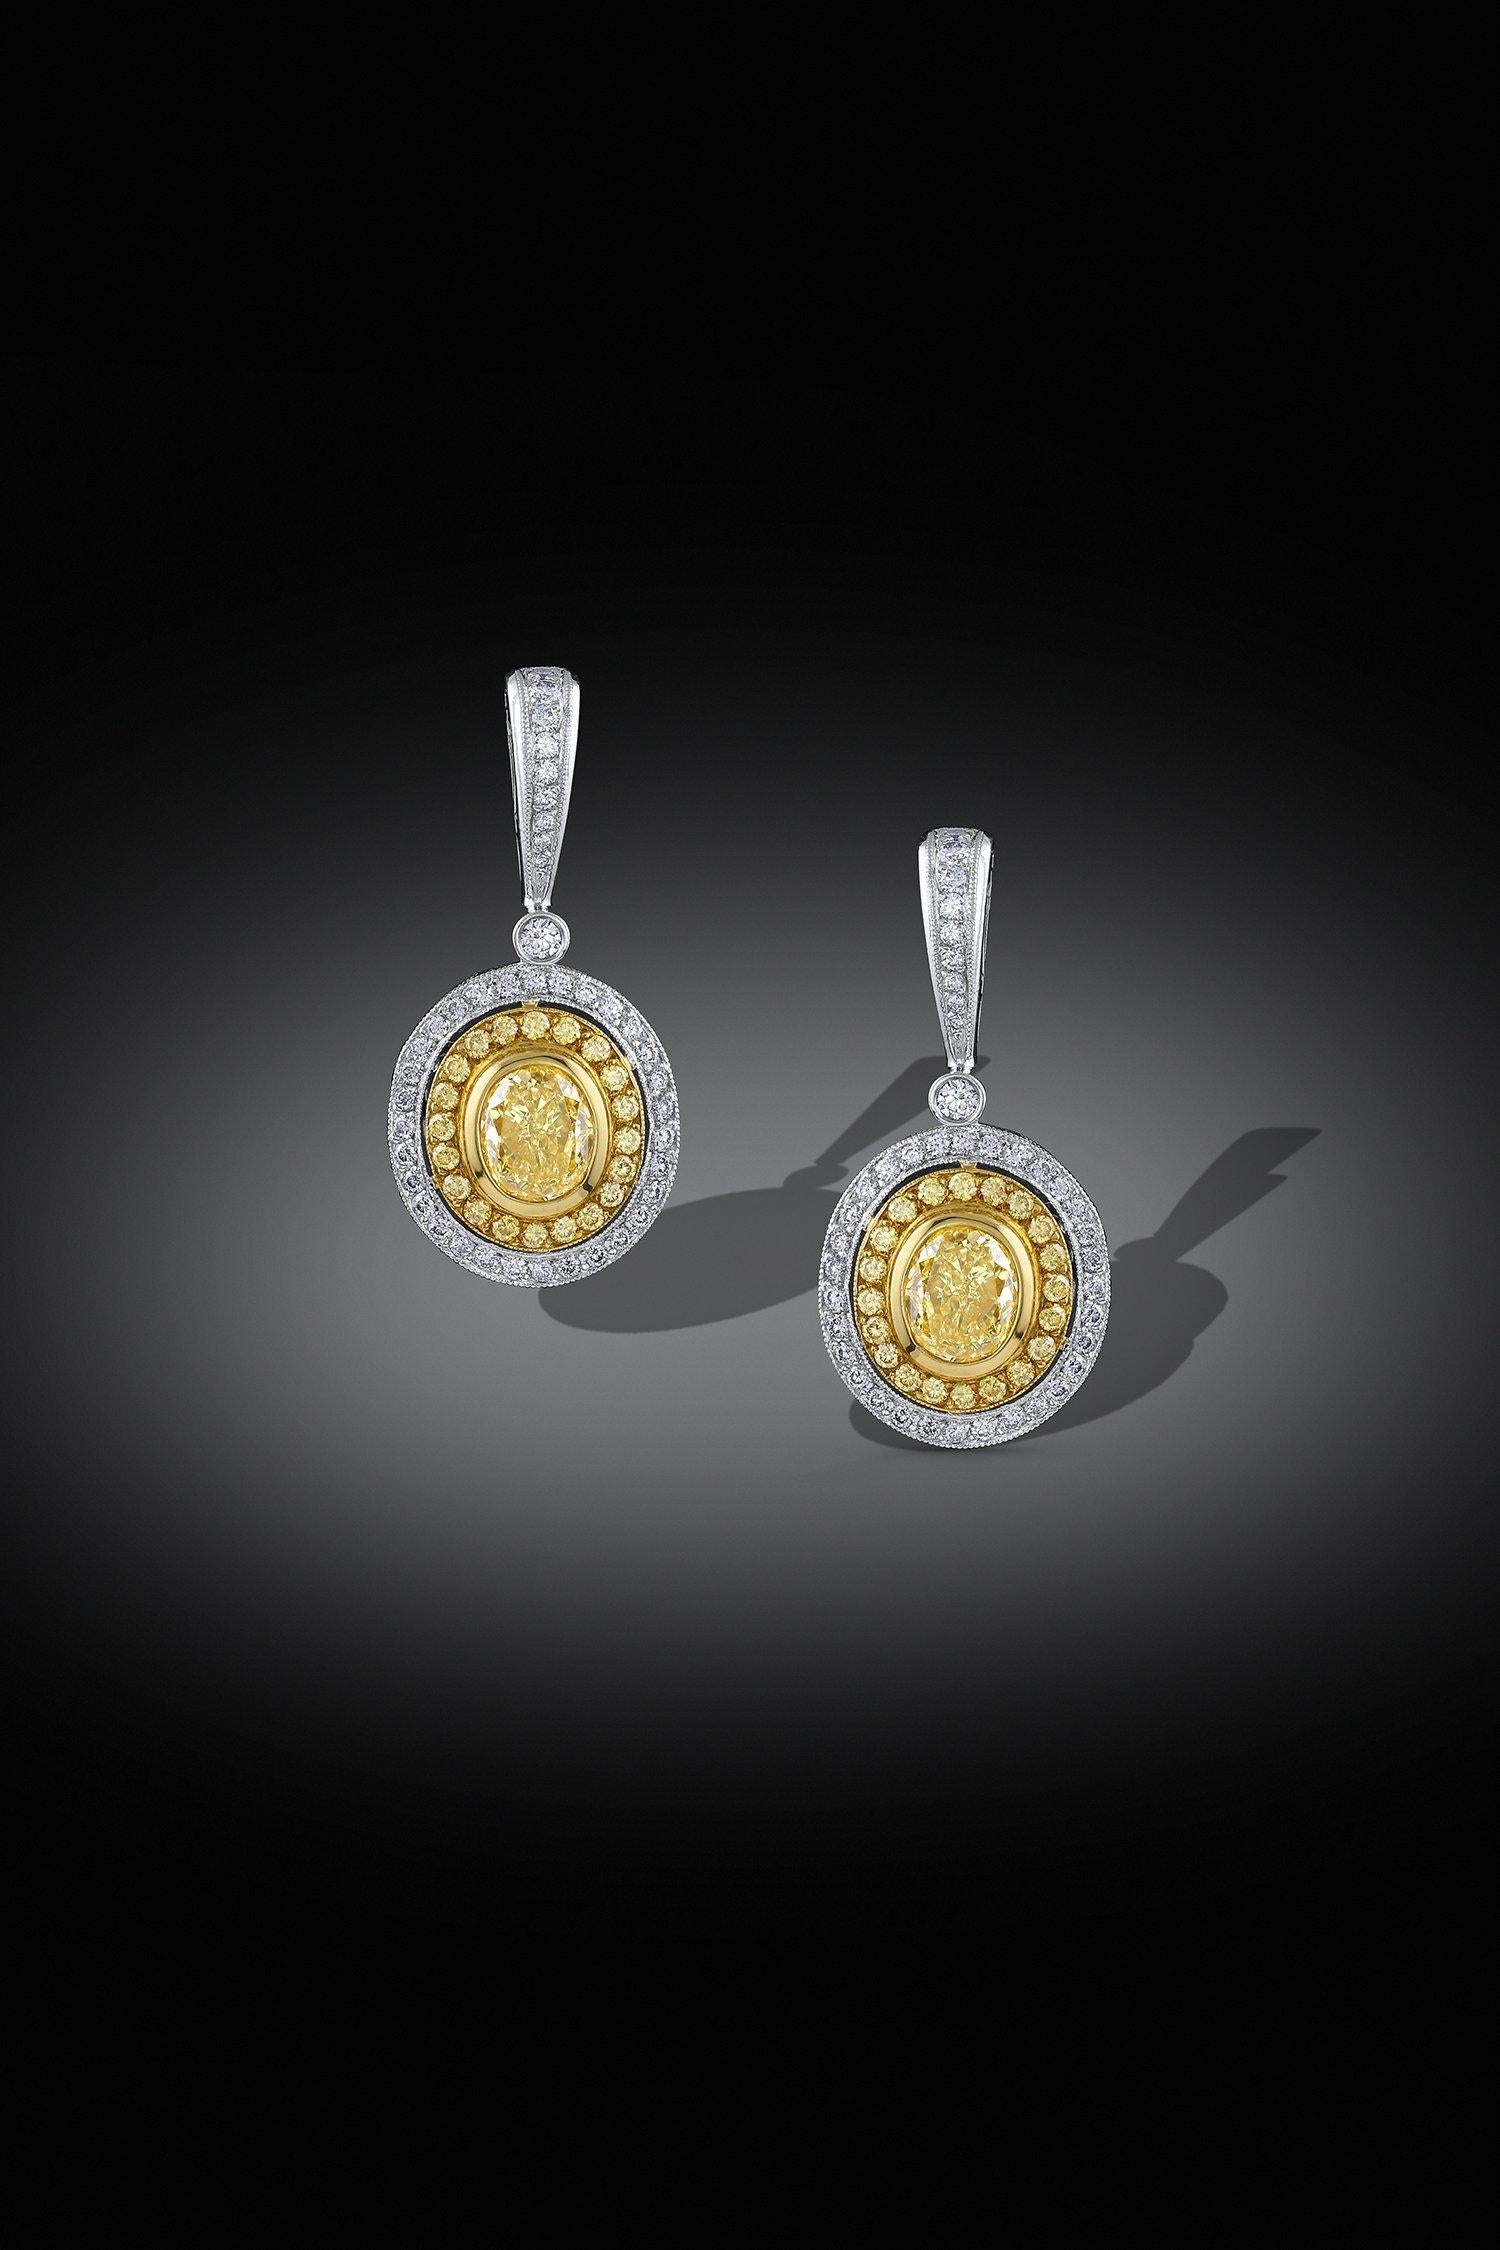 Earrings with perfectly matched 1.07ct and 1.06ct GIA certified fancy yellow oval cut diamonds. There are additional yellow and white diamonds in the 18k yellow and white gold settings. The total diamond weight is 3.05cttw.